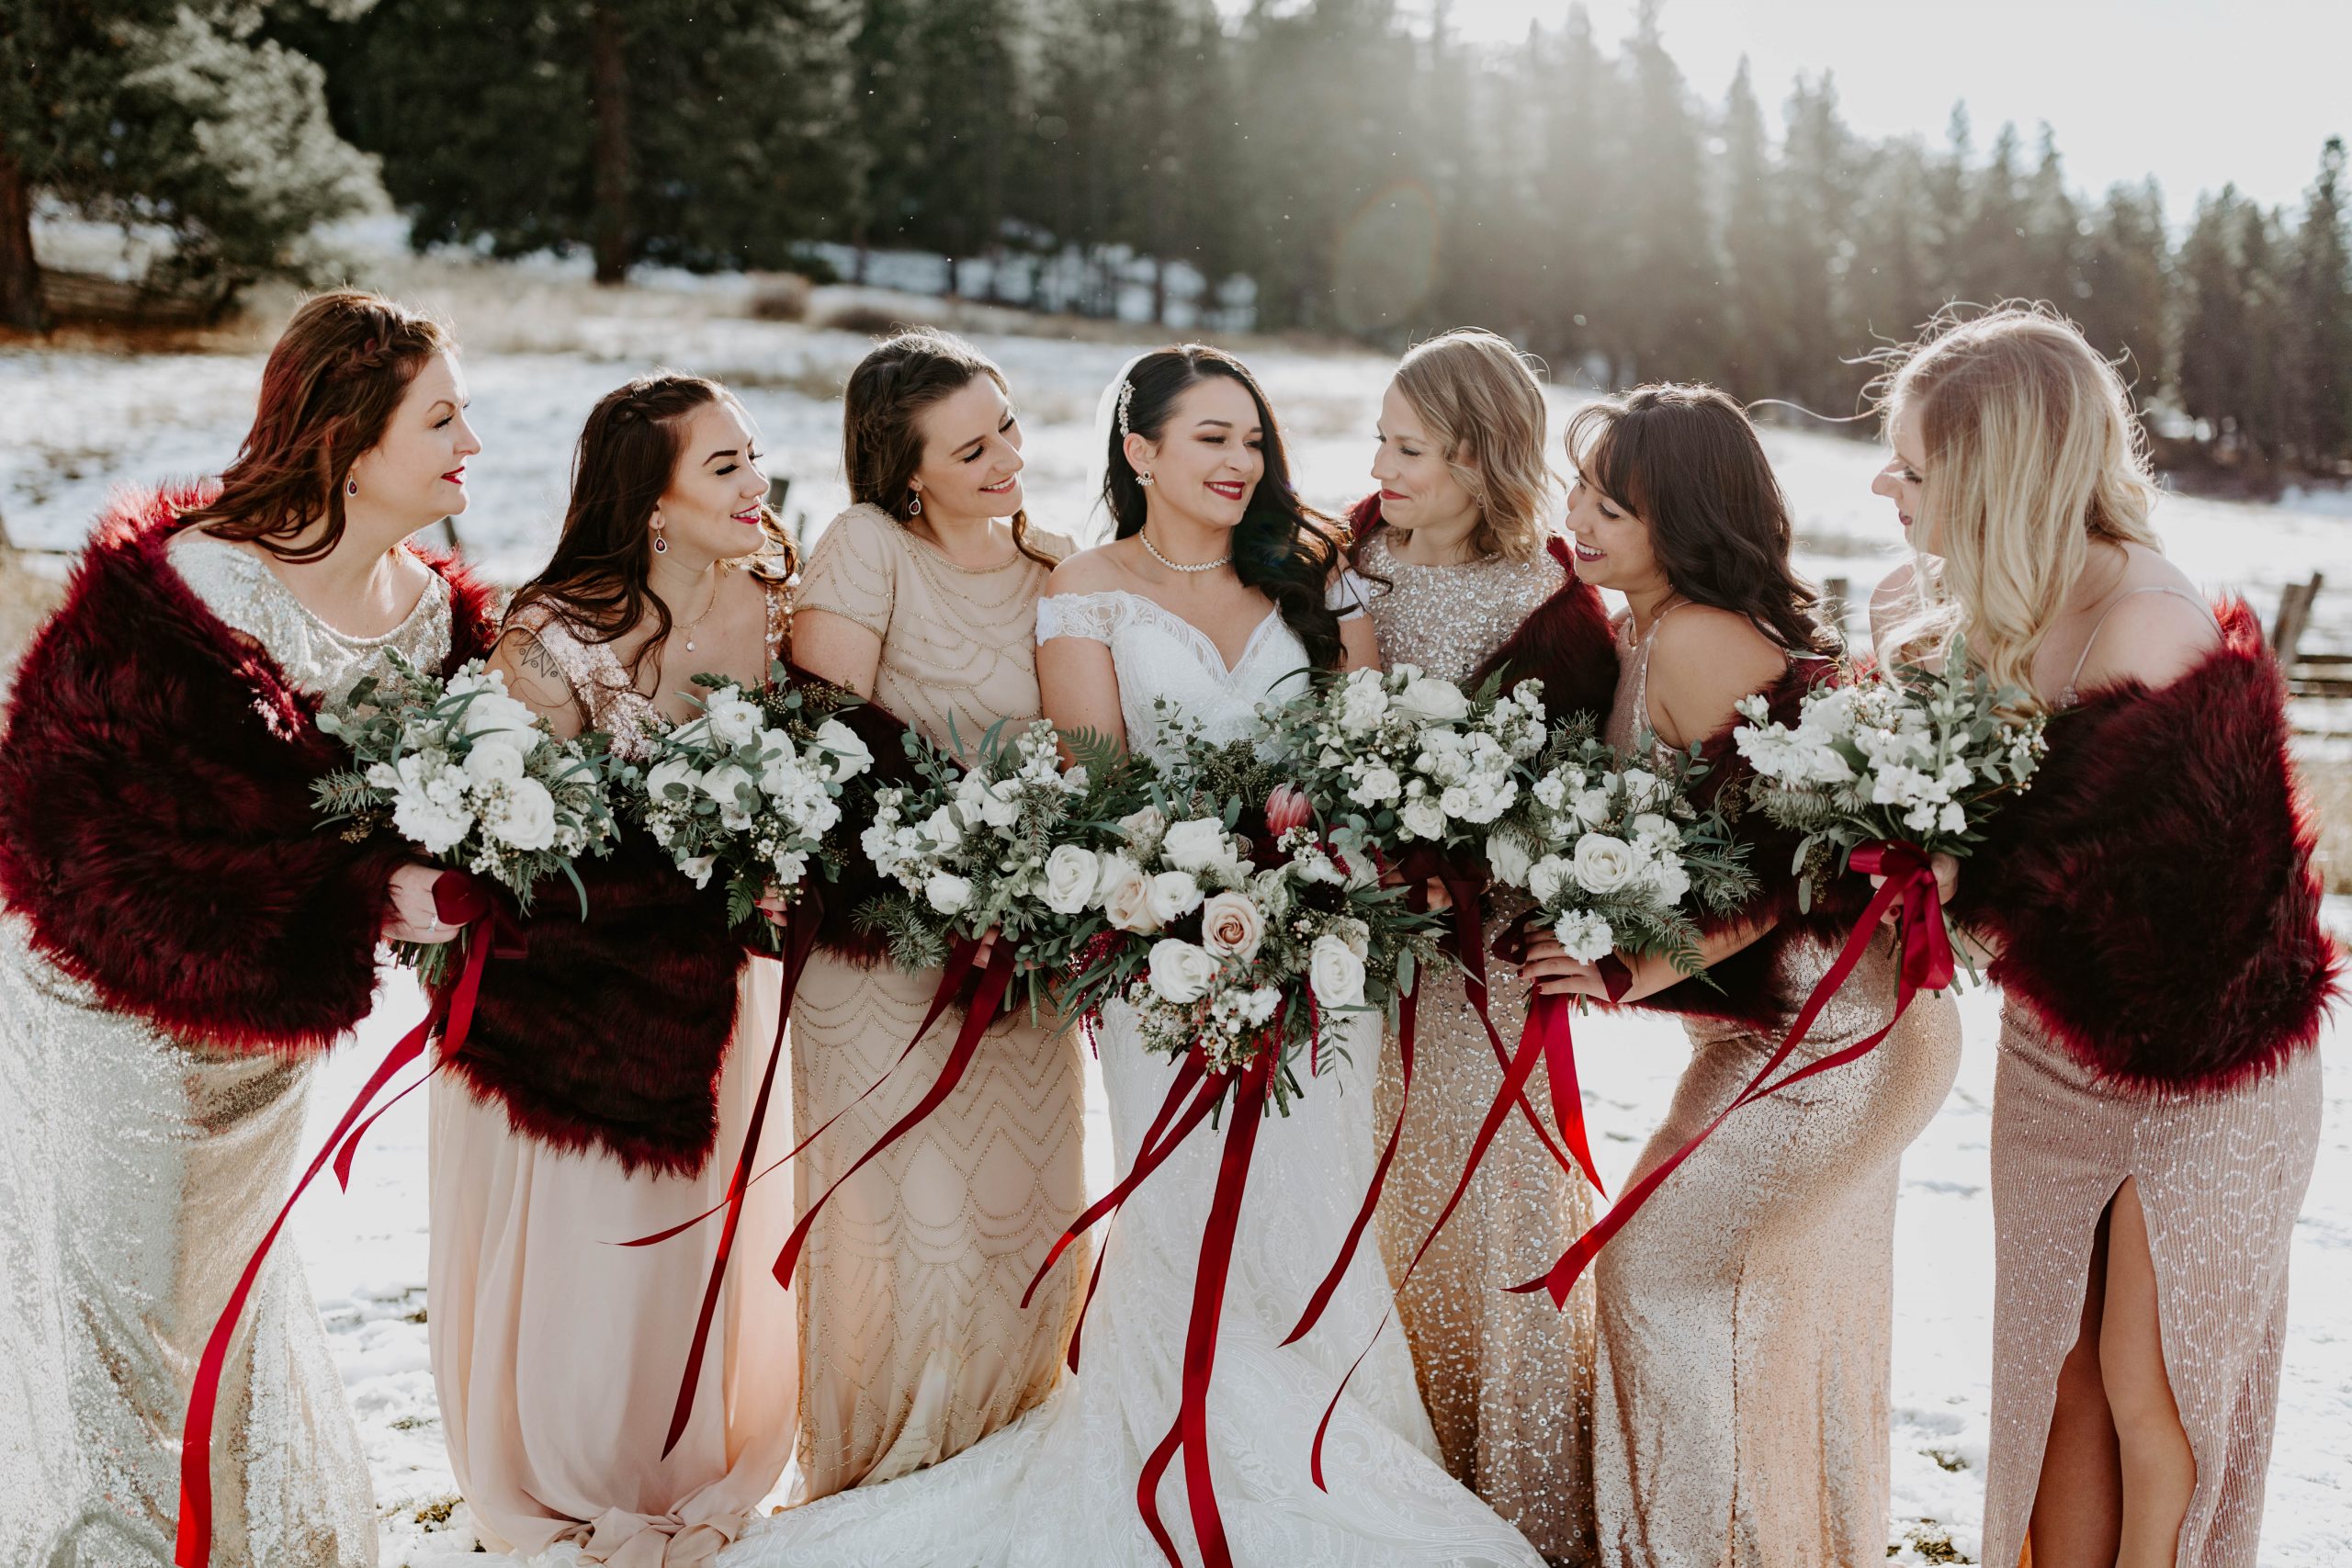 Real Bride Wearing Maggie Sottero Wedding Dress at Winter Wedding with Bridesmaids